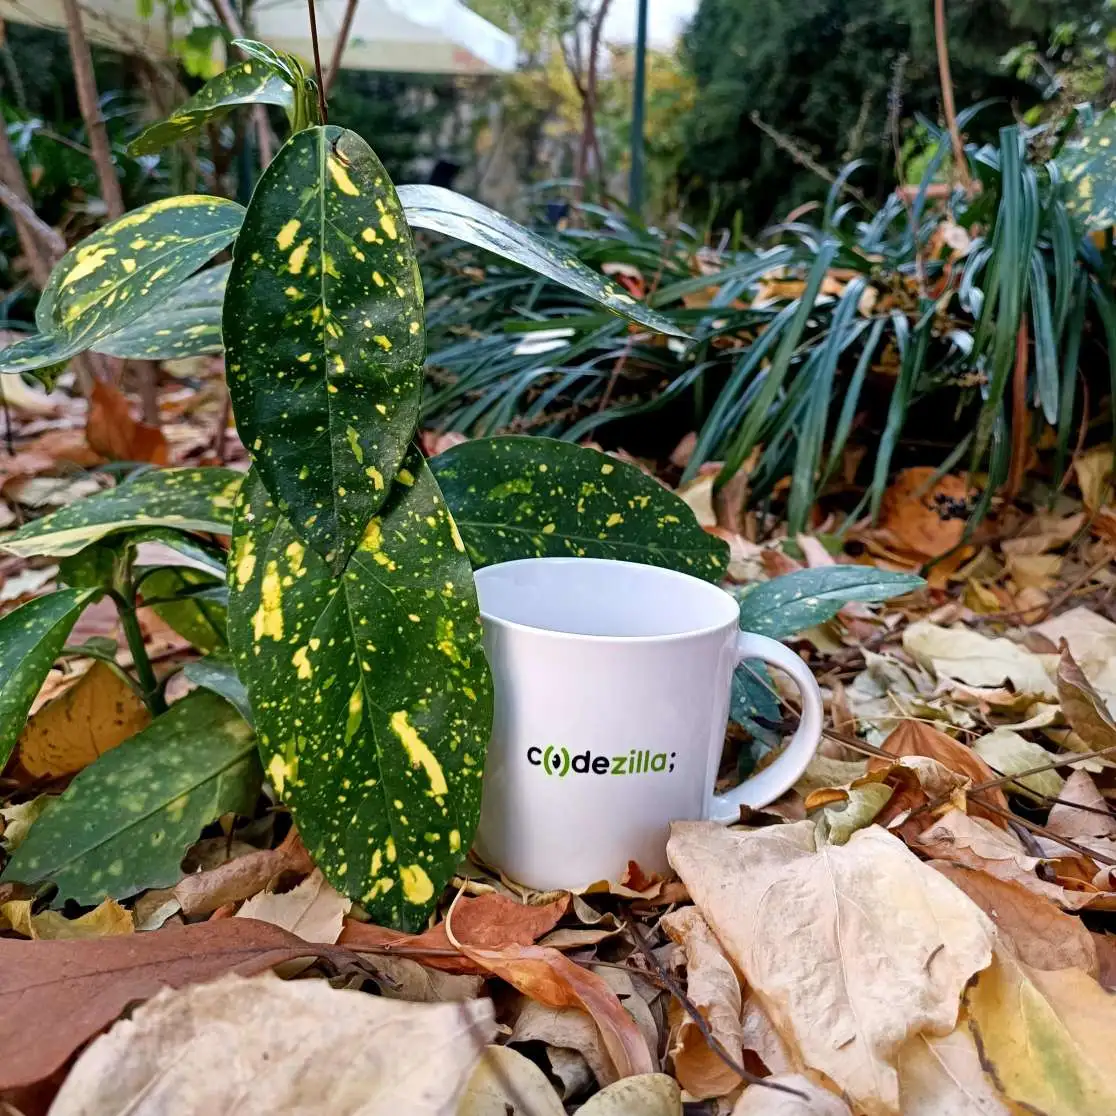 Image of a Codezilla branded cup